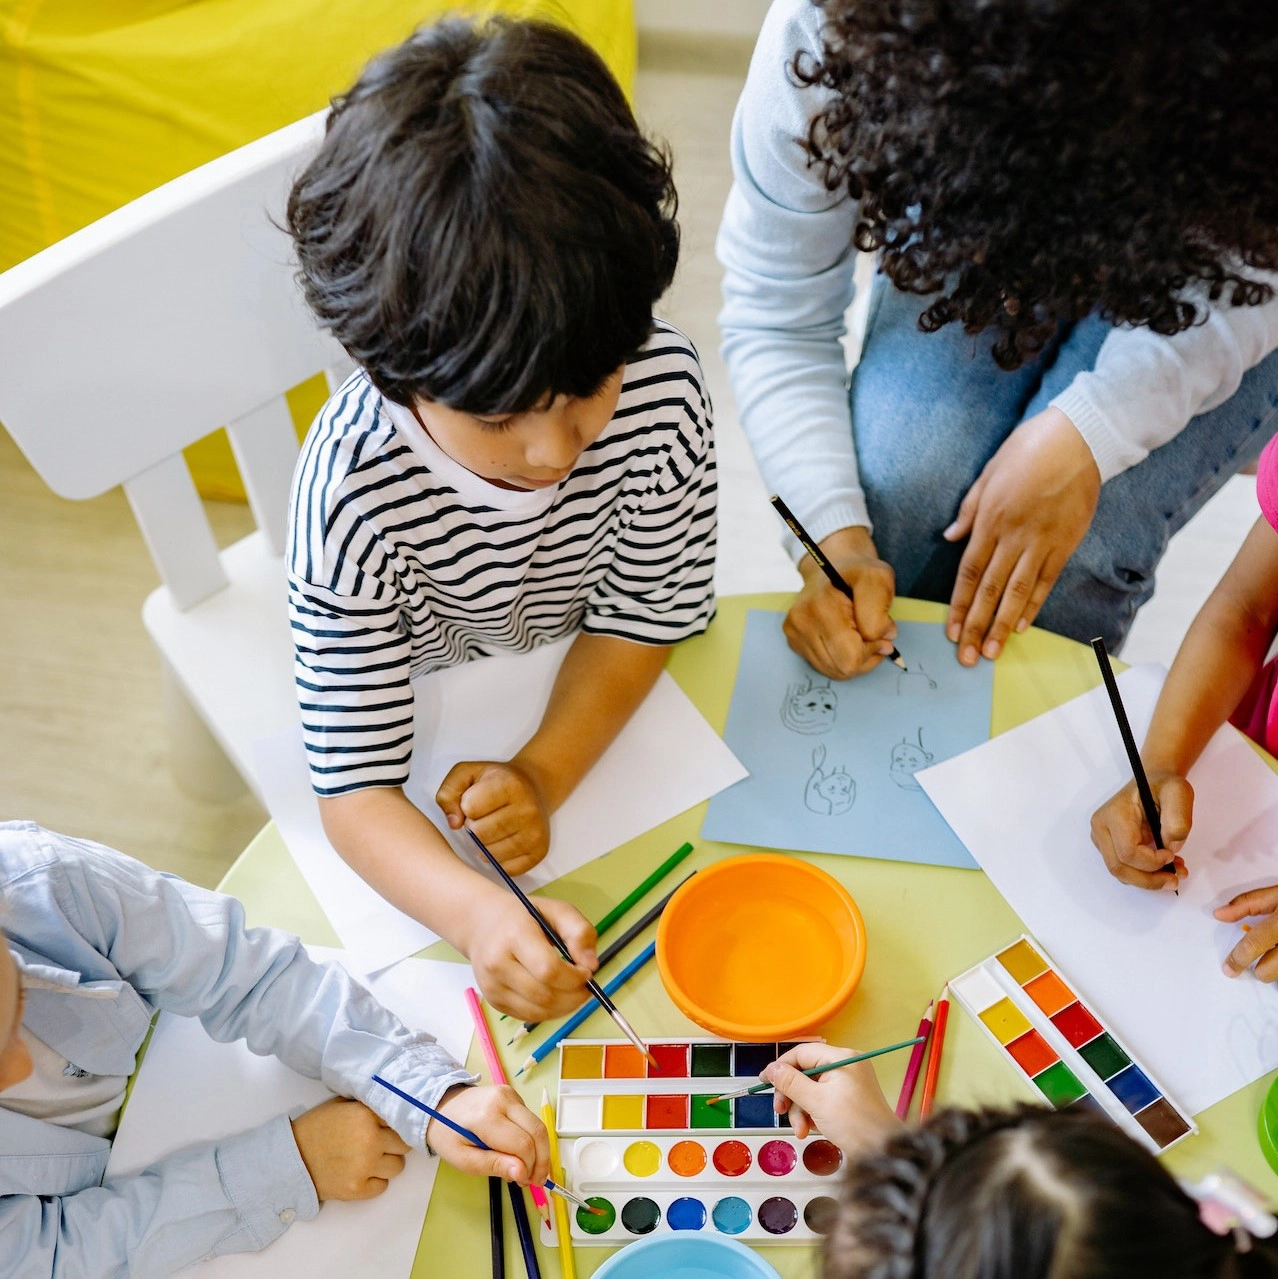 Image of a group of young children drawing and painting with watercolors.